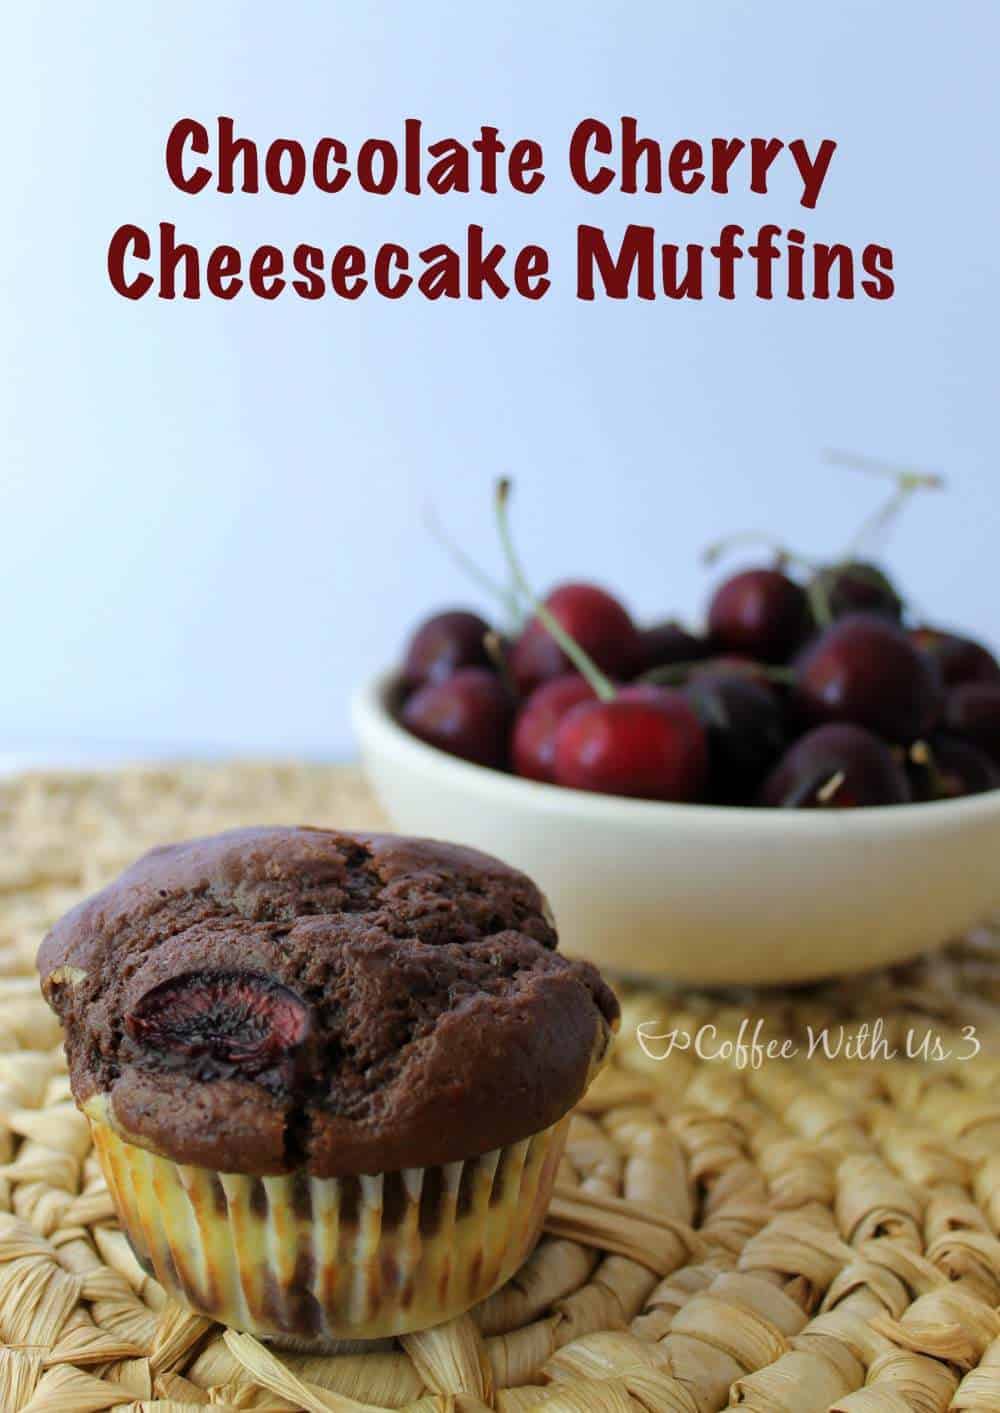 Chocolate Cherry Cheesecake Muffins: Chocolate muffins with chunks of fresh cherries throughout, stuffed with a creamy cheesecake layer. This homemade muffin recipe is perfect for busy breakfasts and snacks!